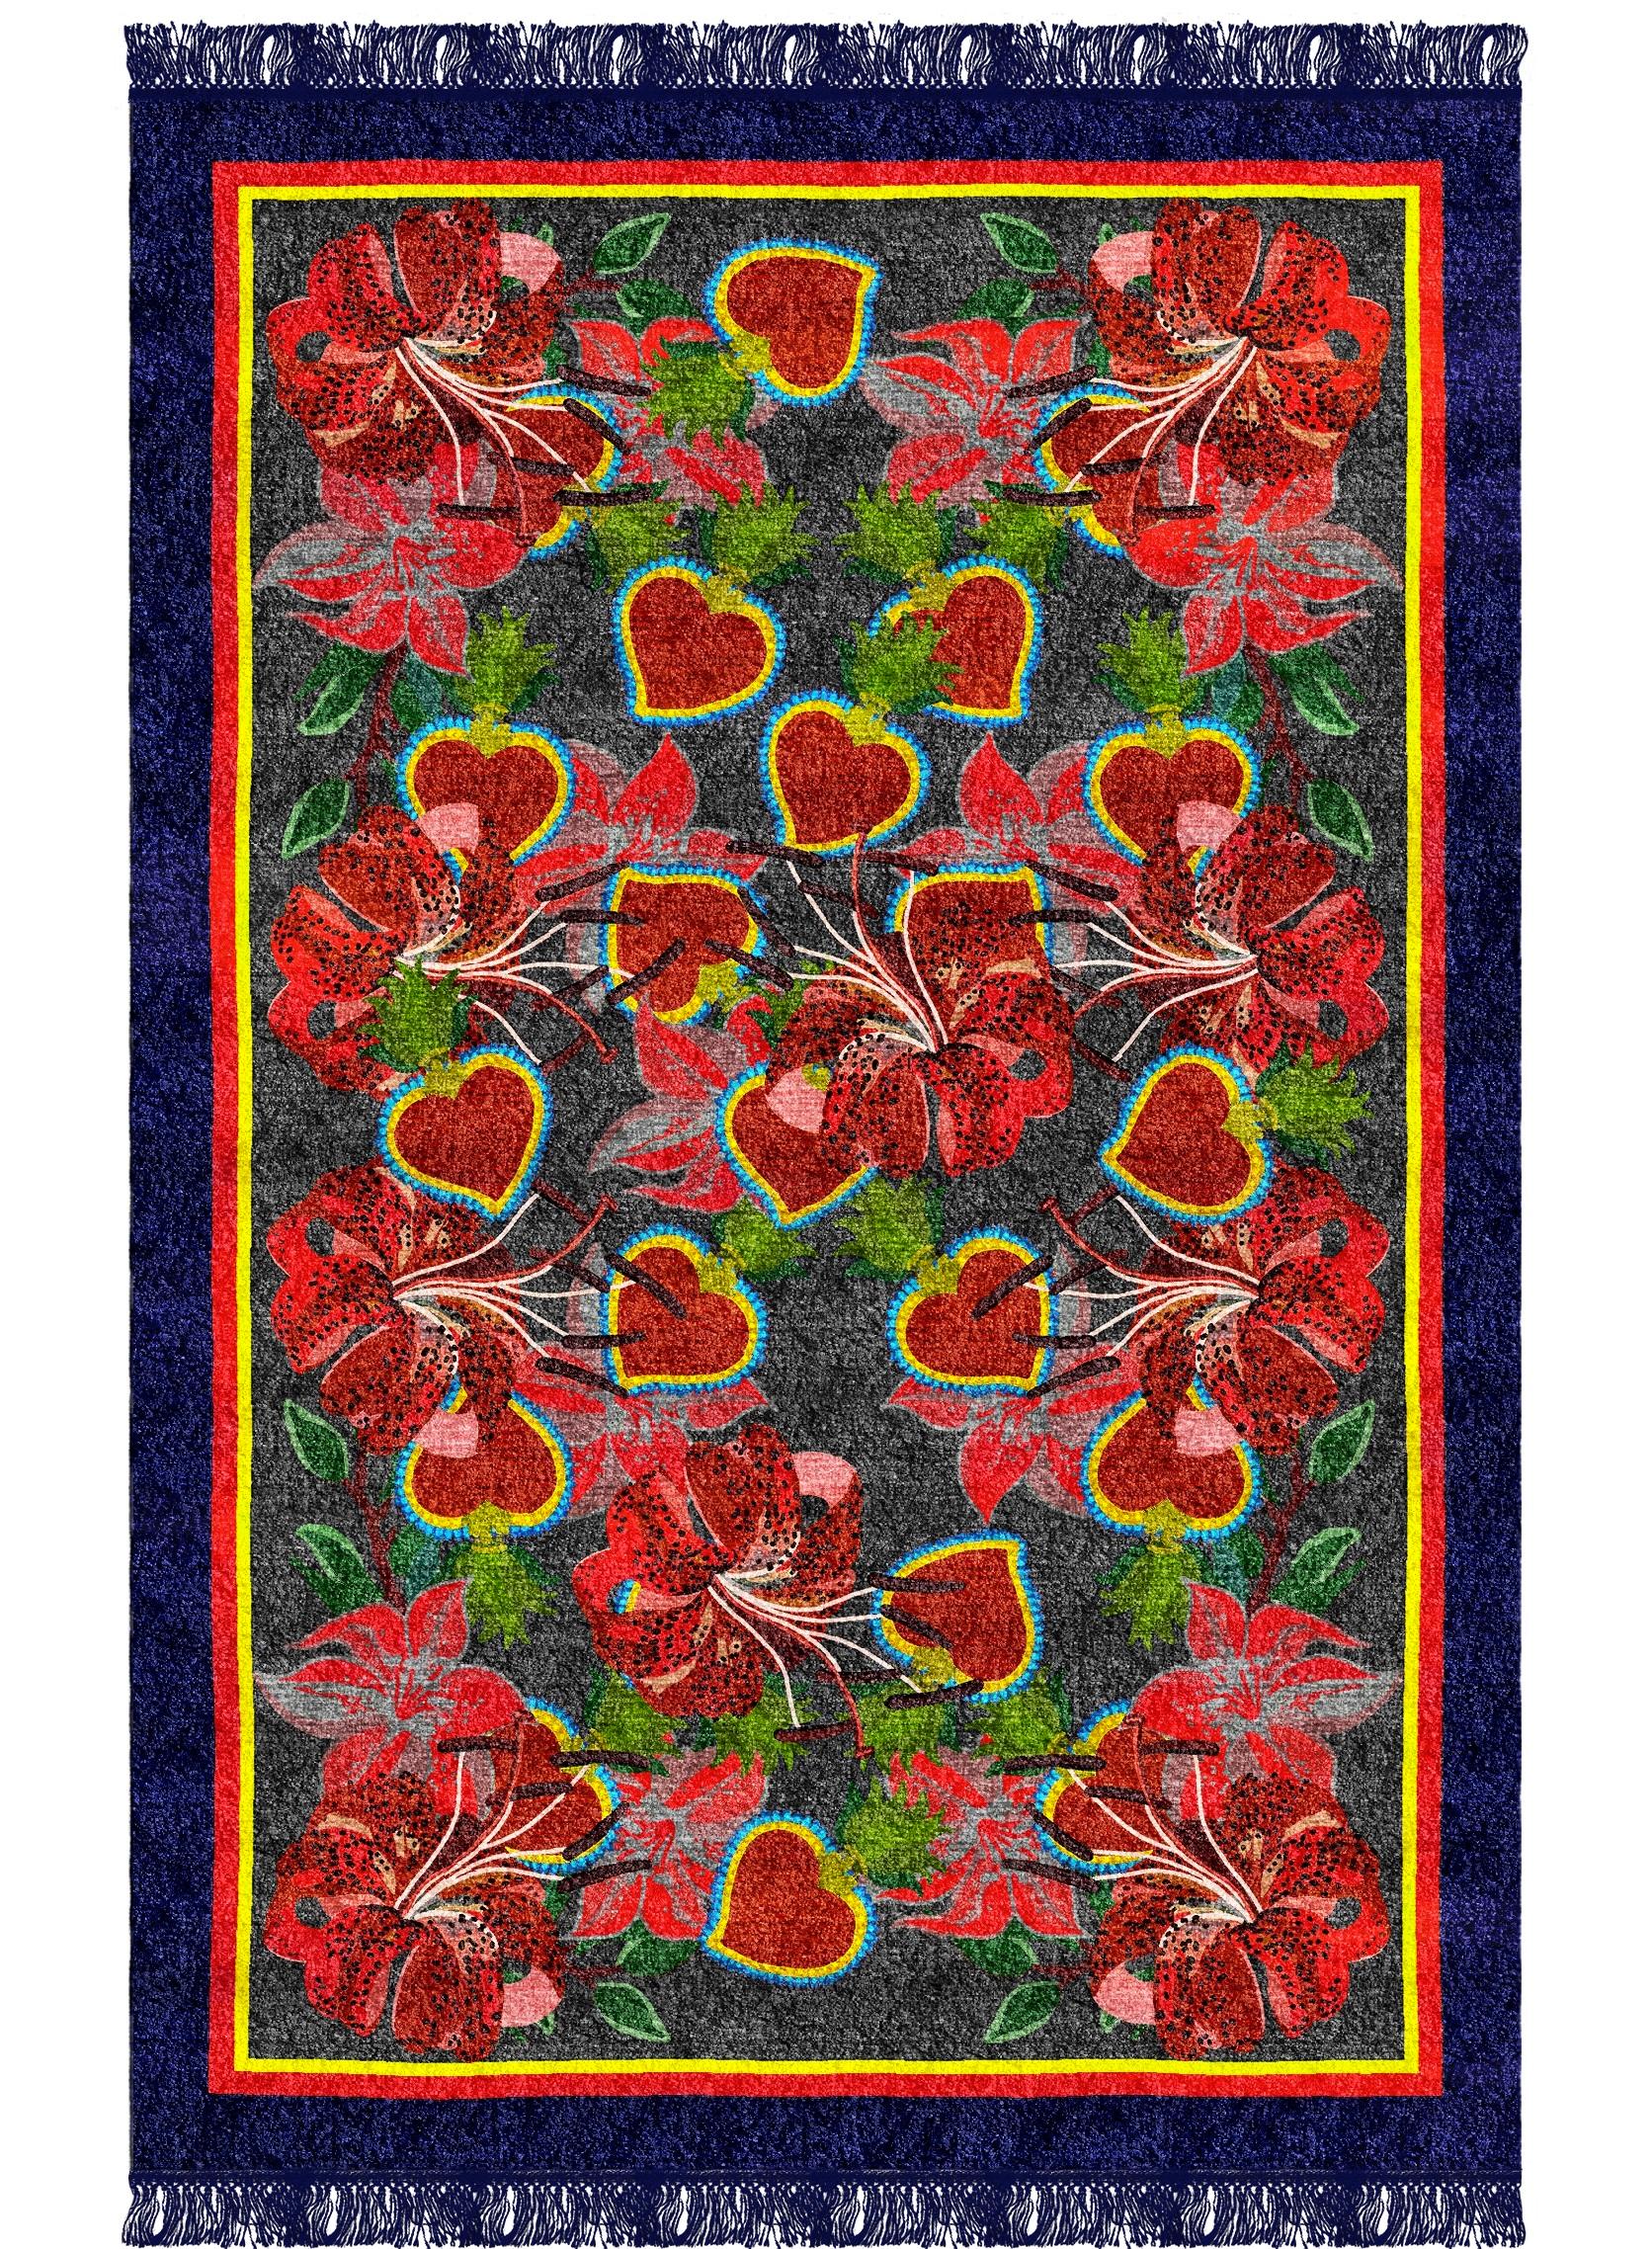 Cuori rug I by Giulio Brambilla
Dimensions: D 300 x W 200 x H 0.5 cm
Materials: NZ wool, melange yarn

Named after the Italian word for “heart“, this rug is part of a refined collection of rugs designed by Giulio Brambilla that are hand woven